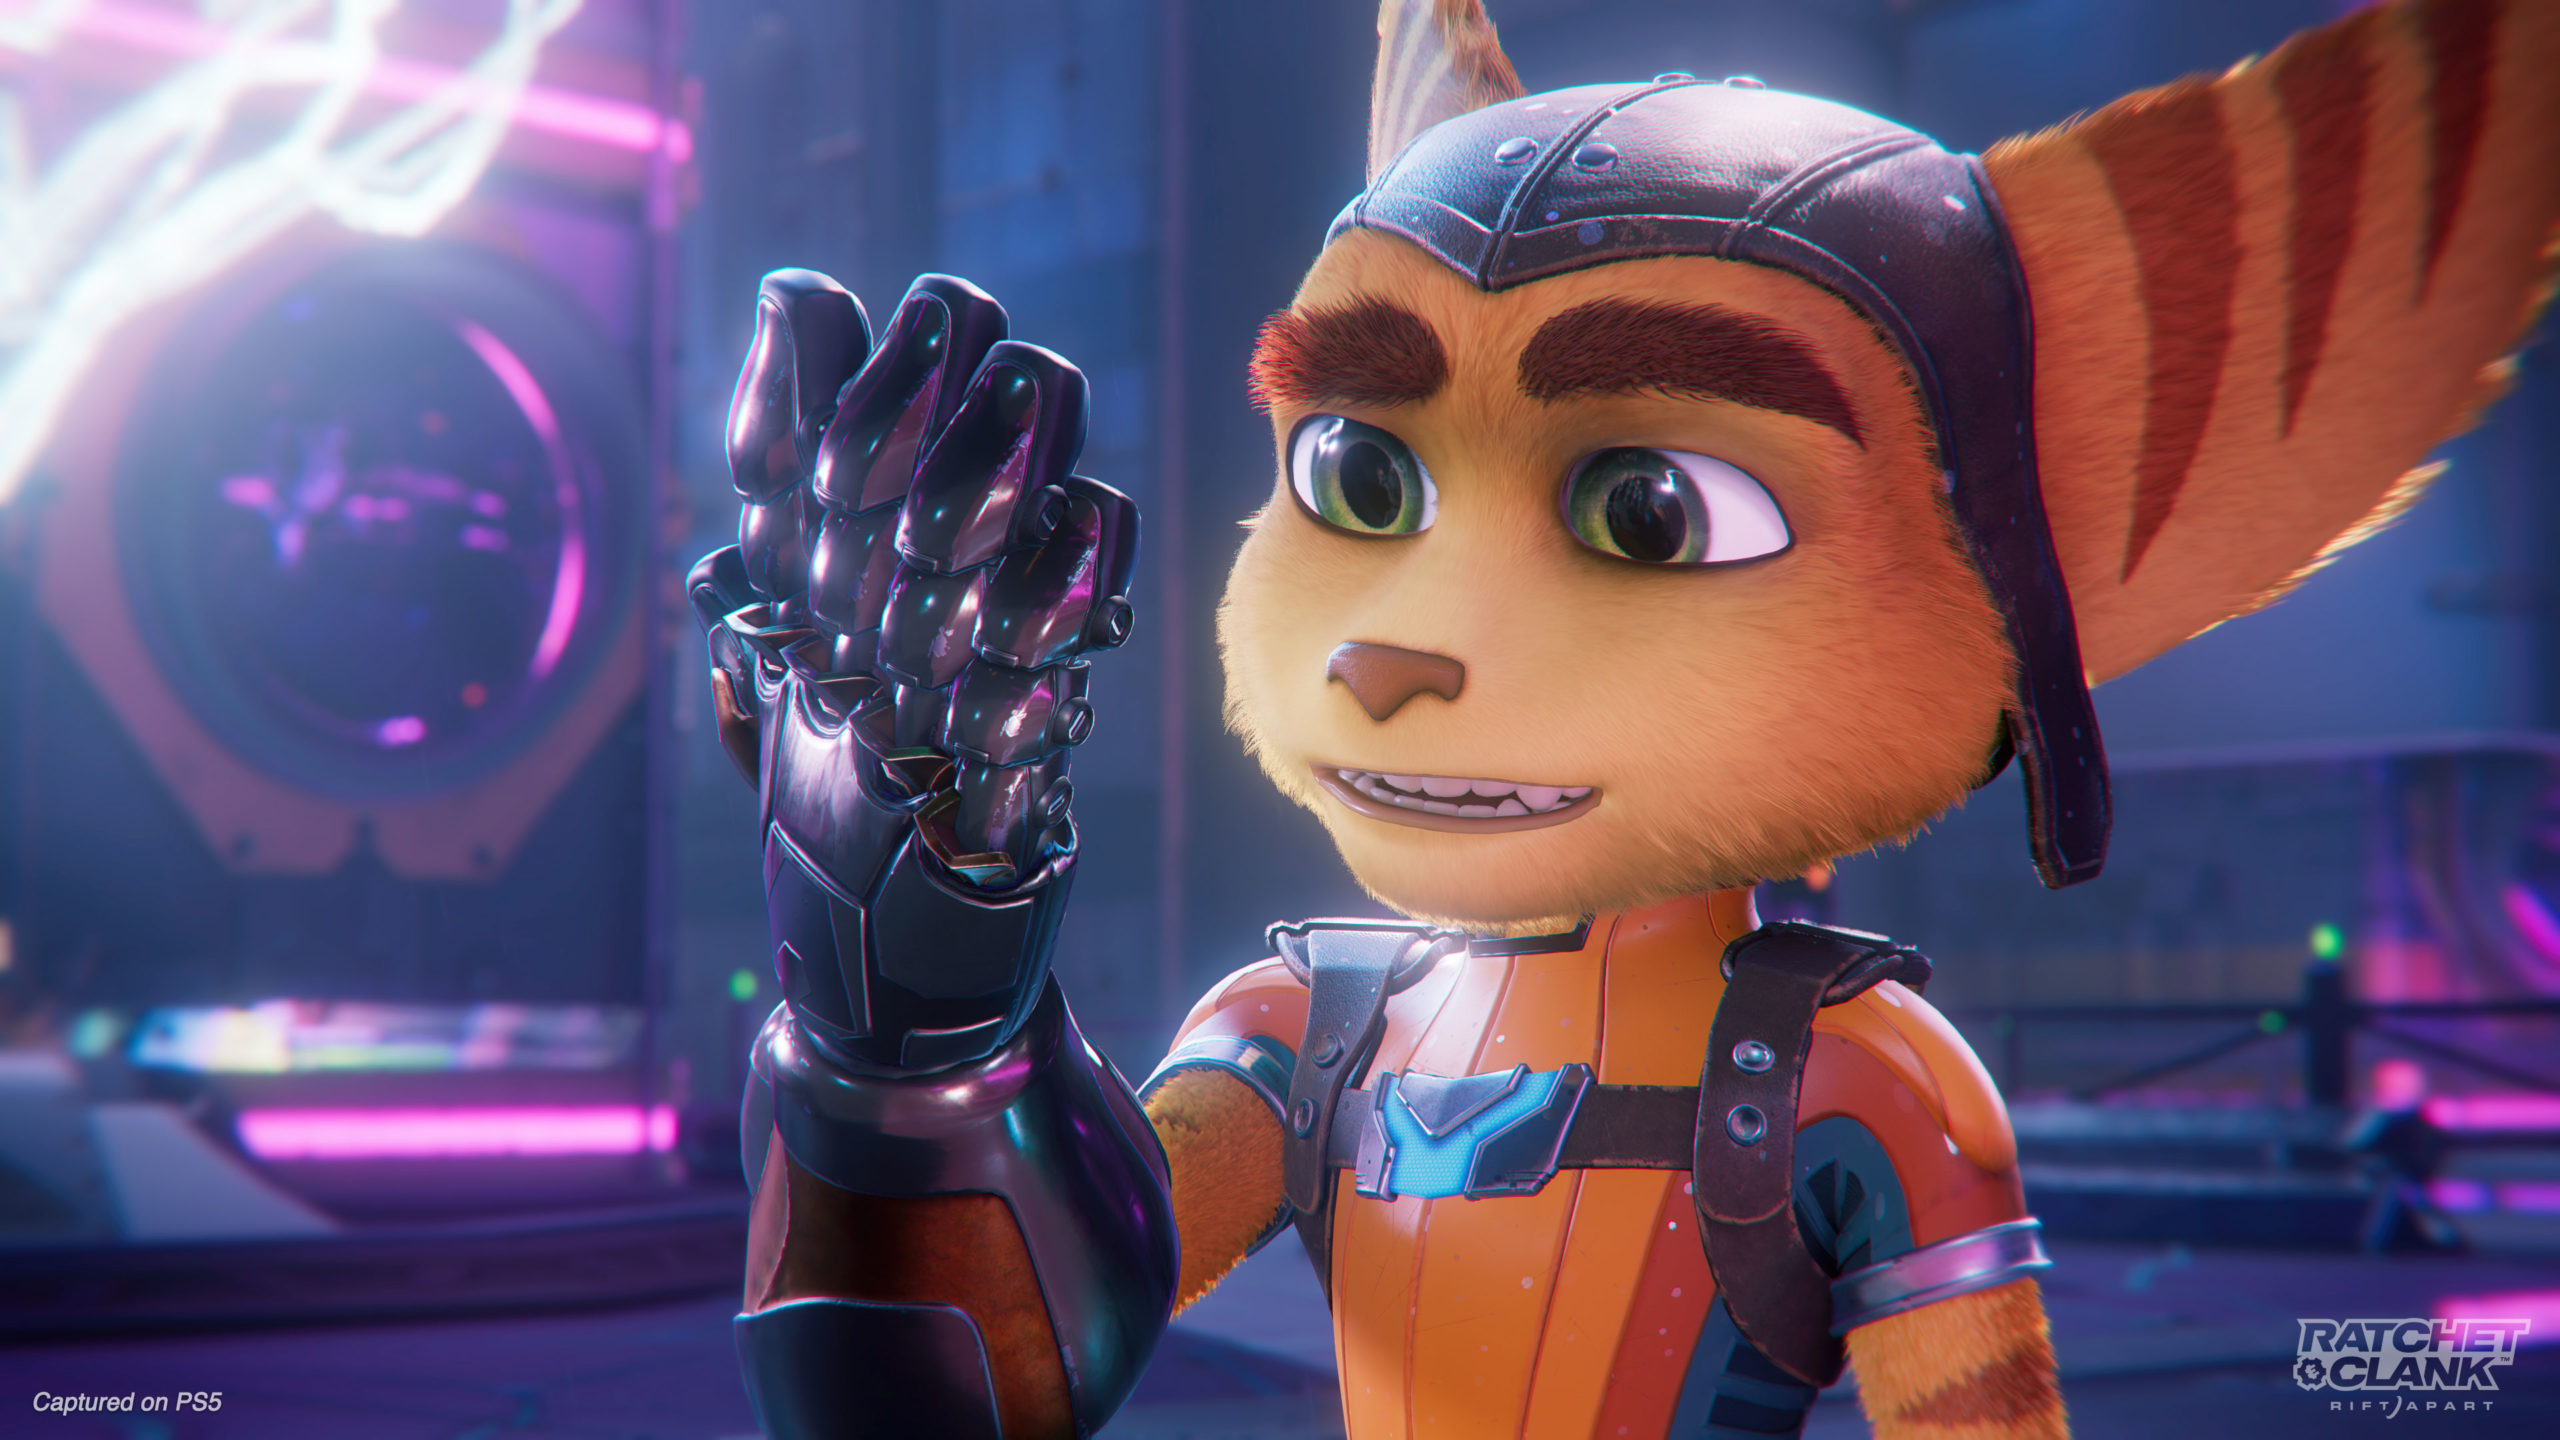 new ratchet and clank game